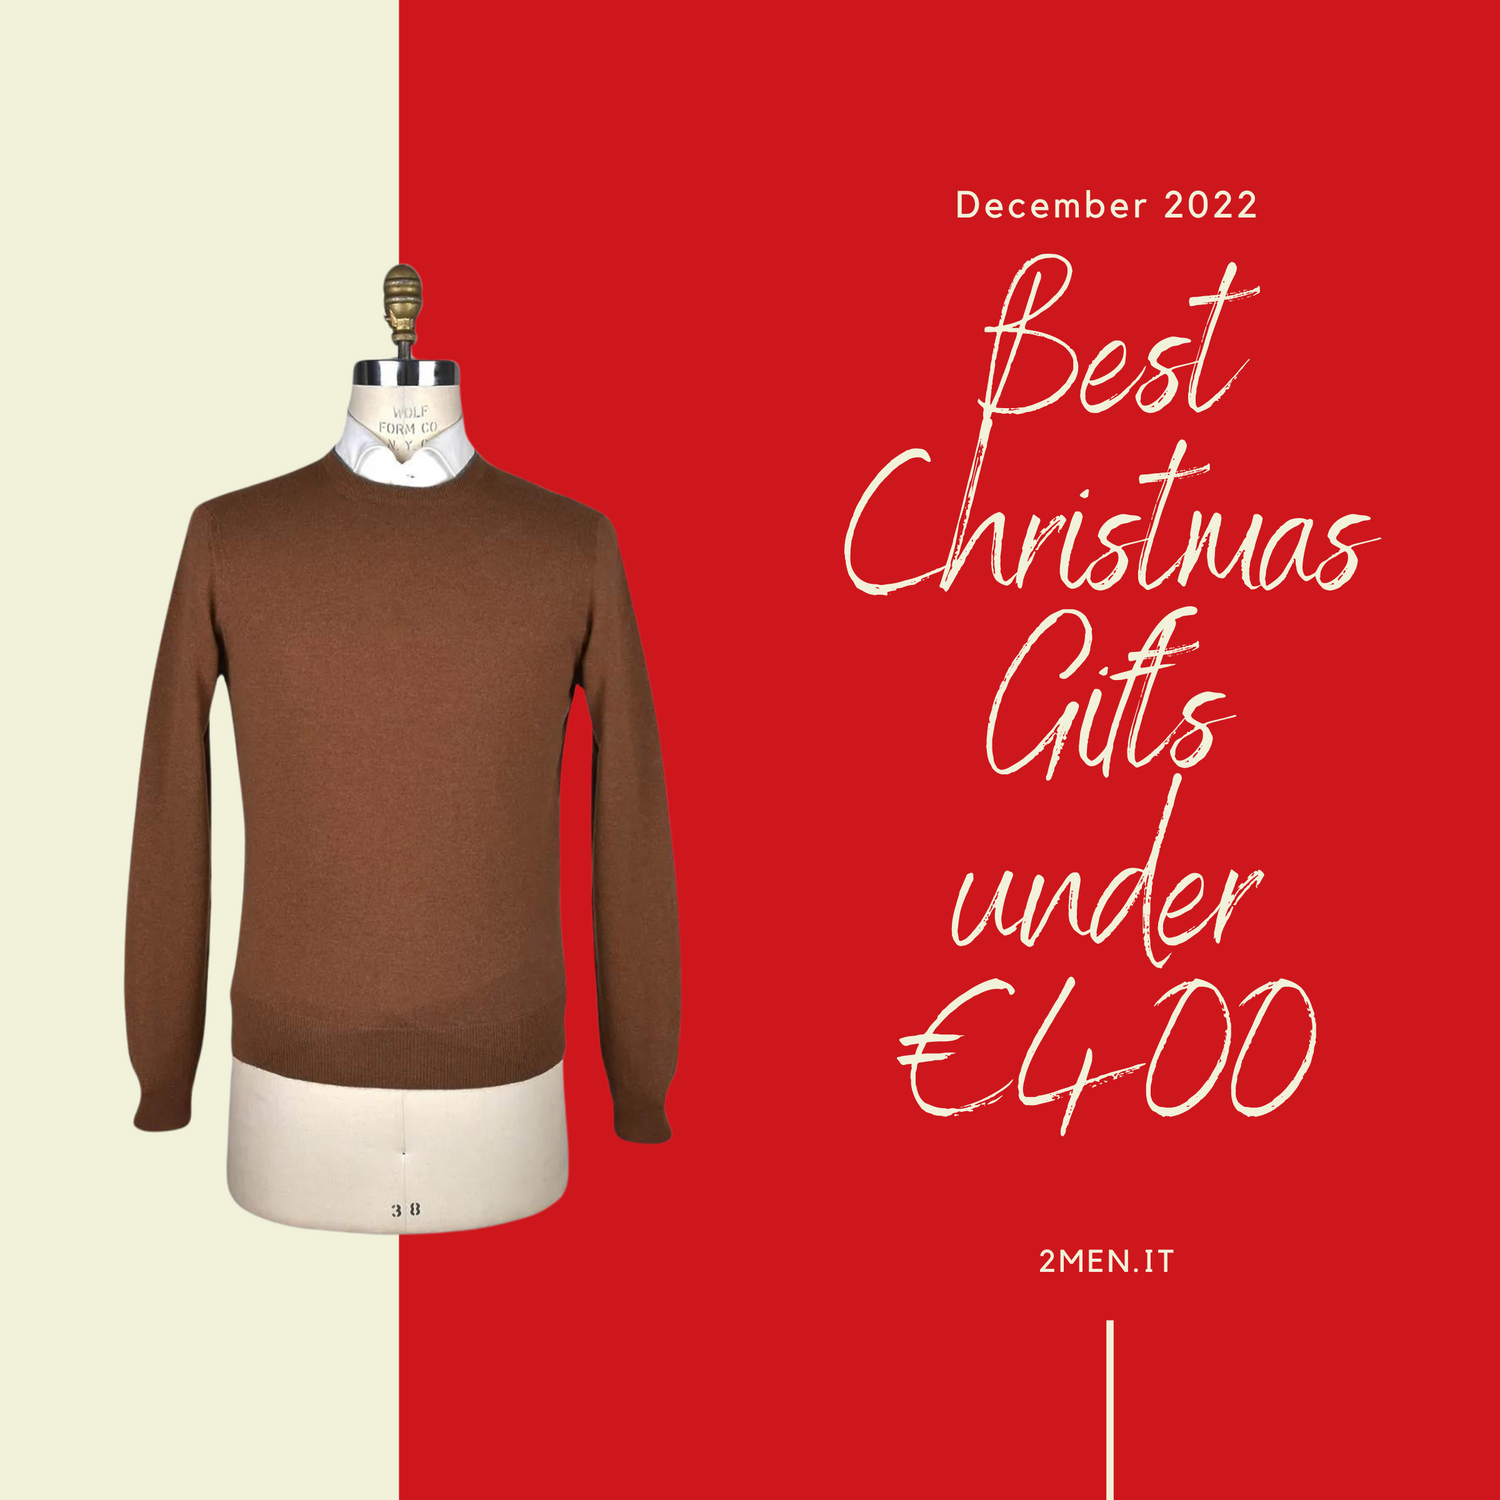 Best Christmas Gifts For Young Men 2022 Under €400 - Gift Guide